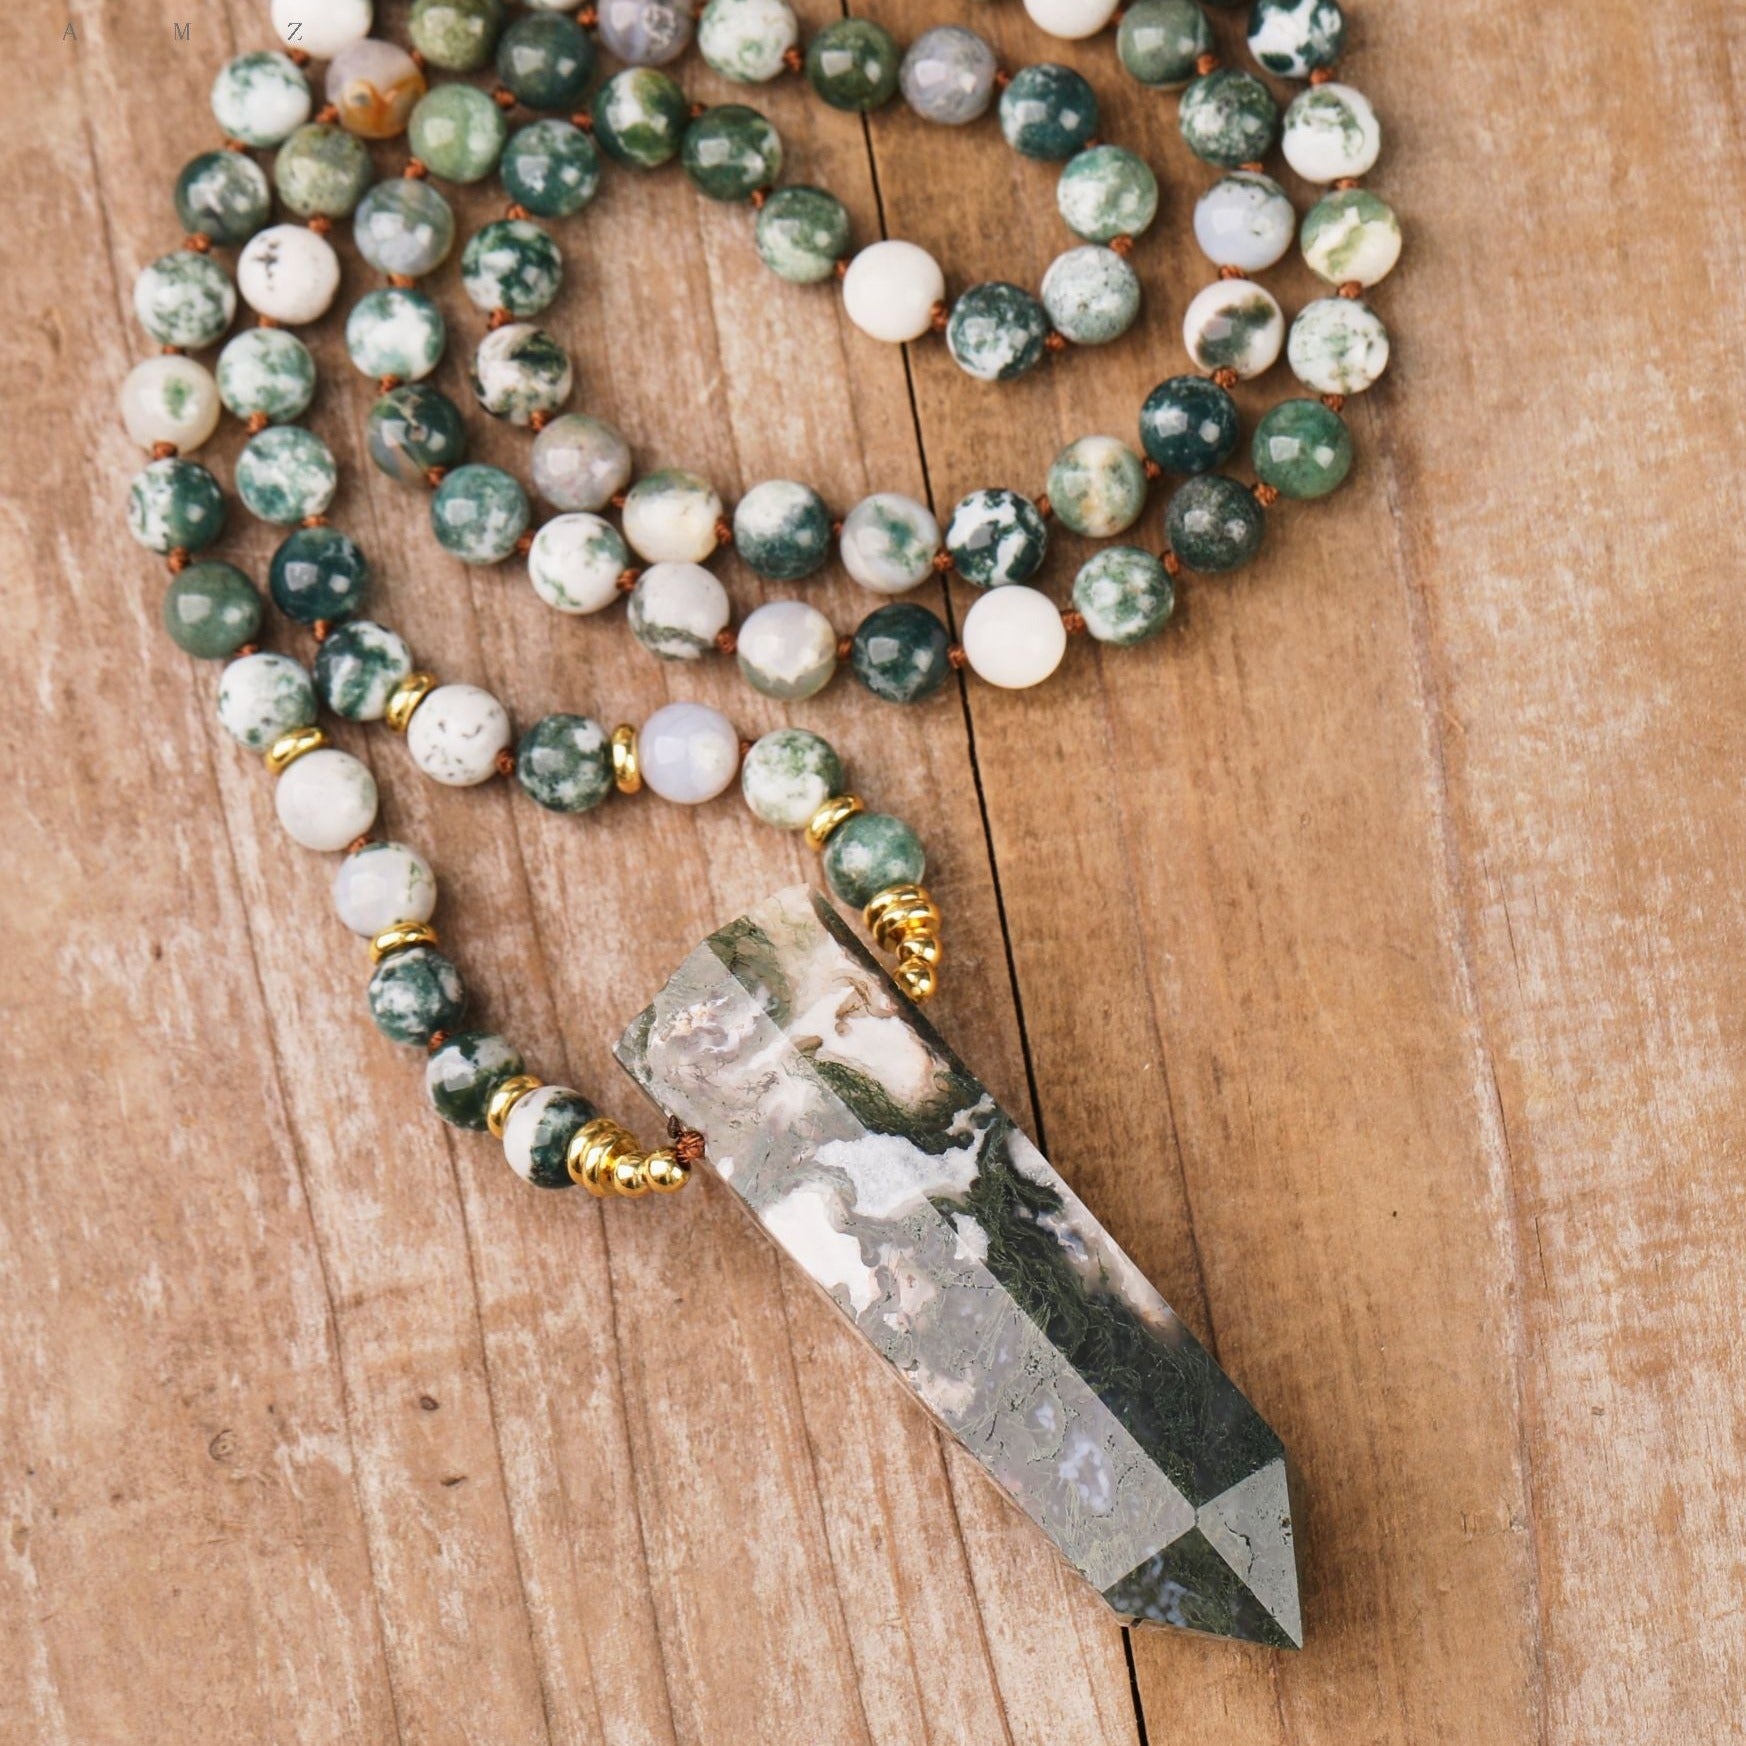 108 Natural Moss Agate Stone Mala Bead Necklace